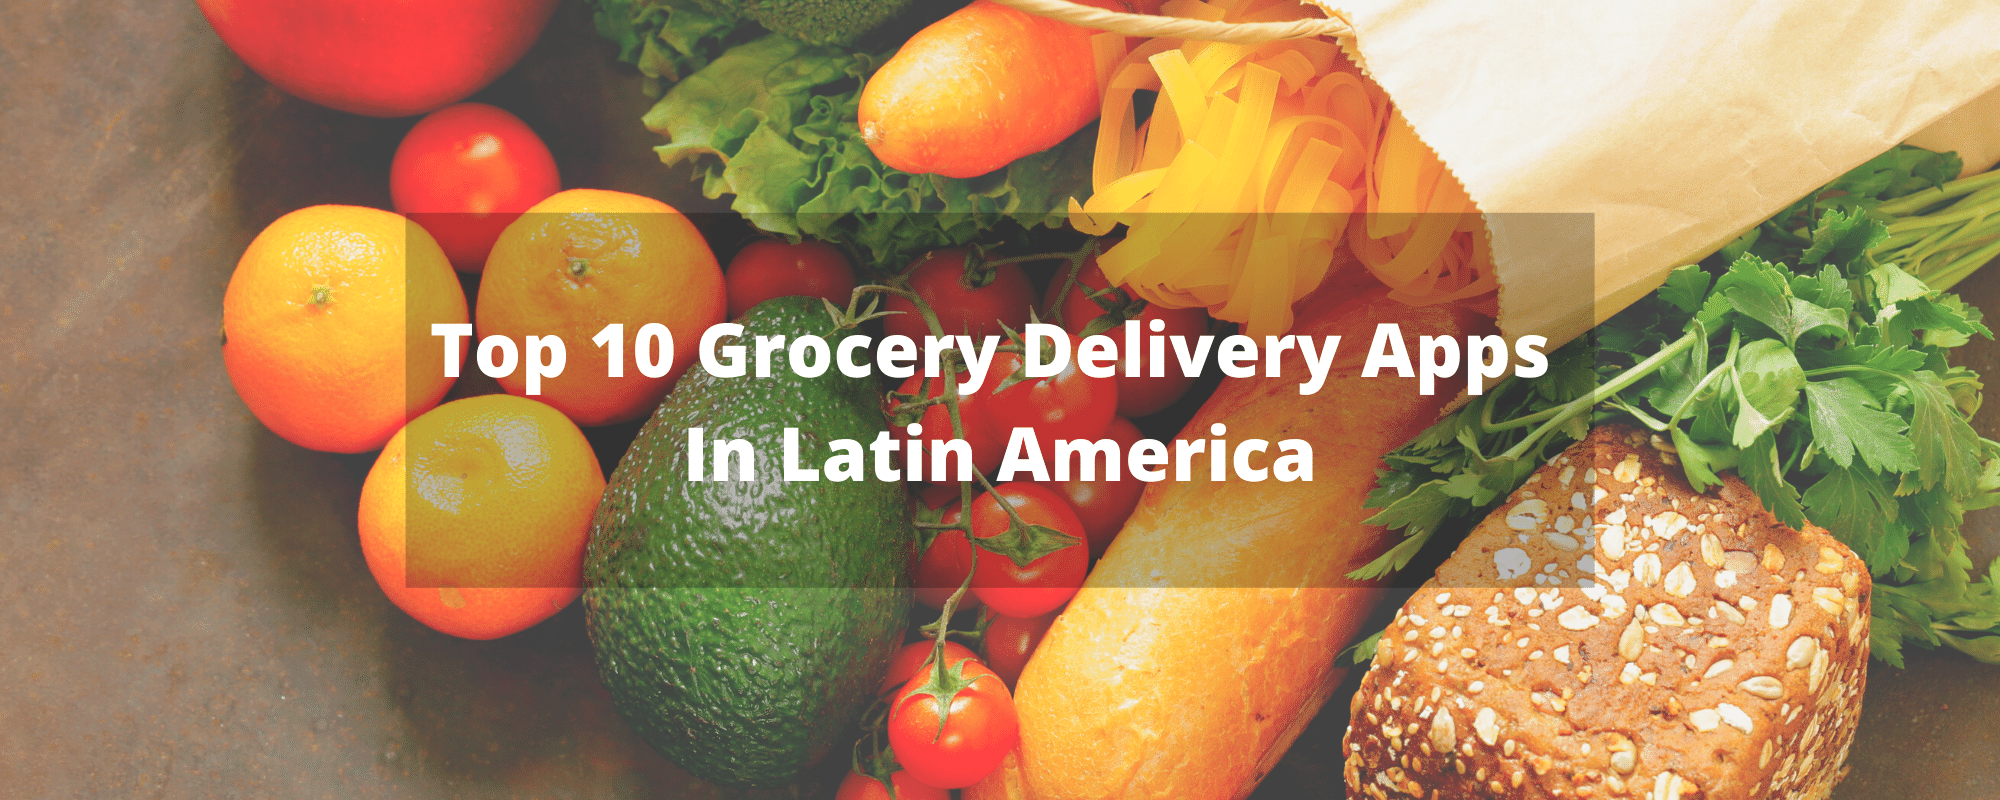 grocery delivery apps in latin america